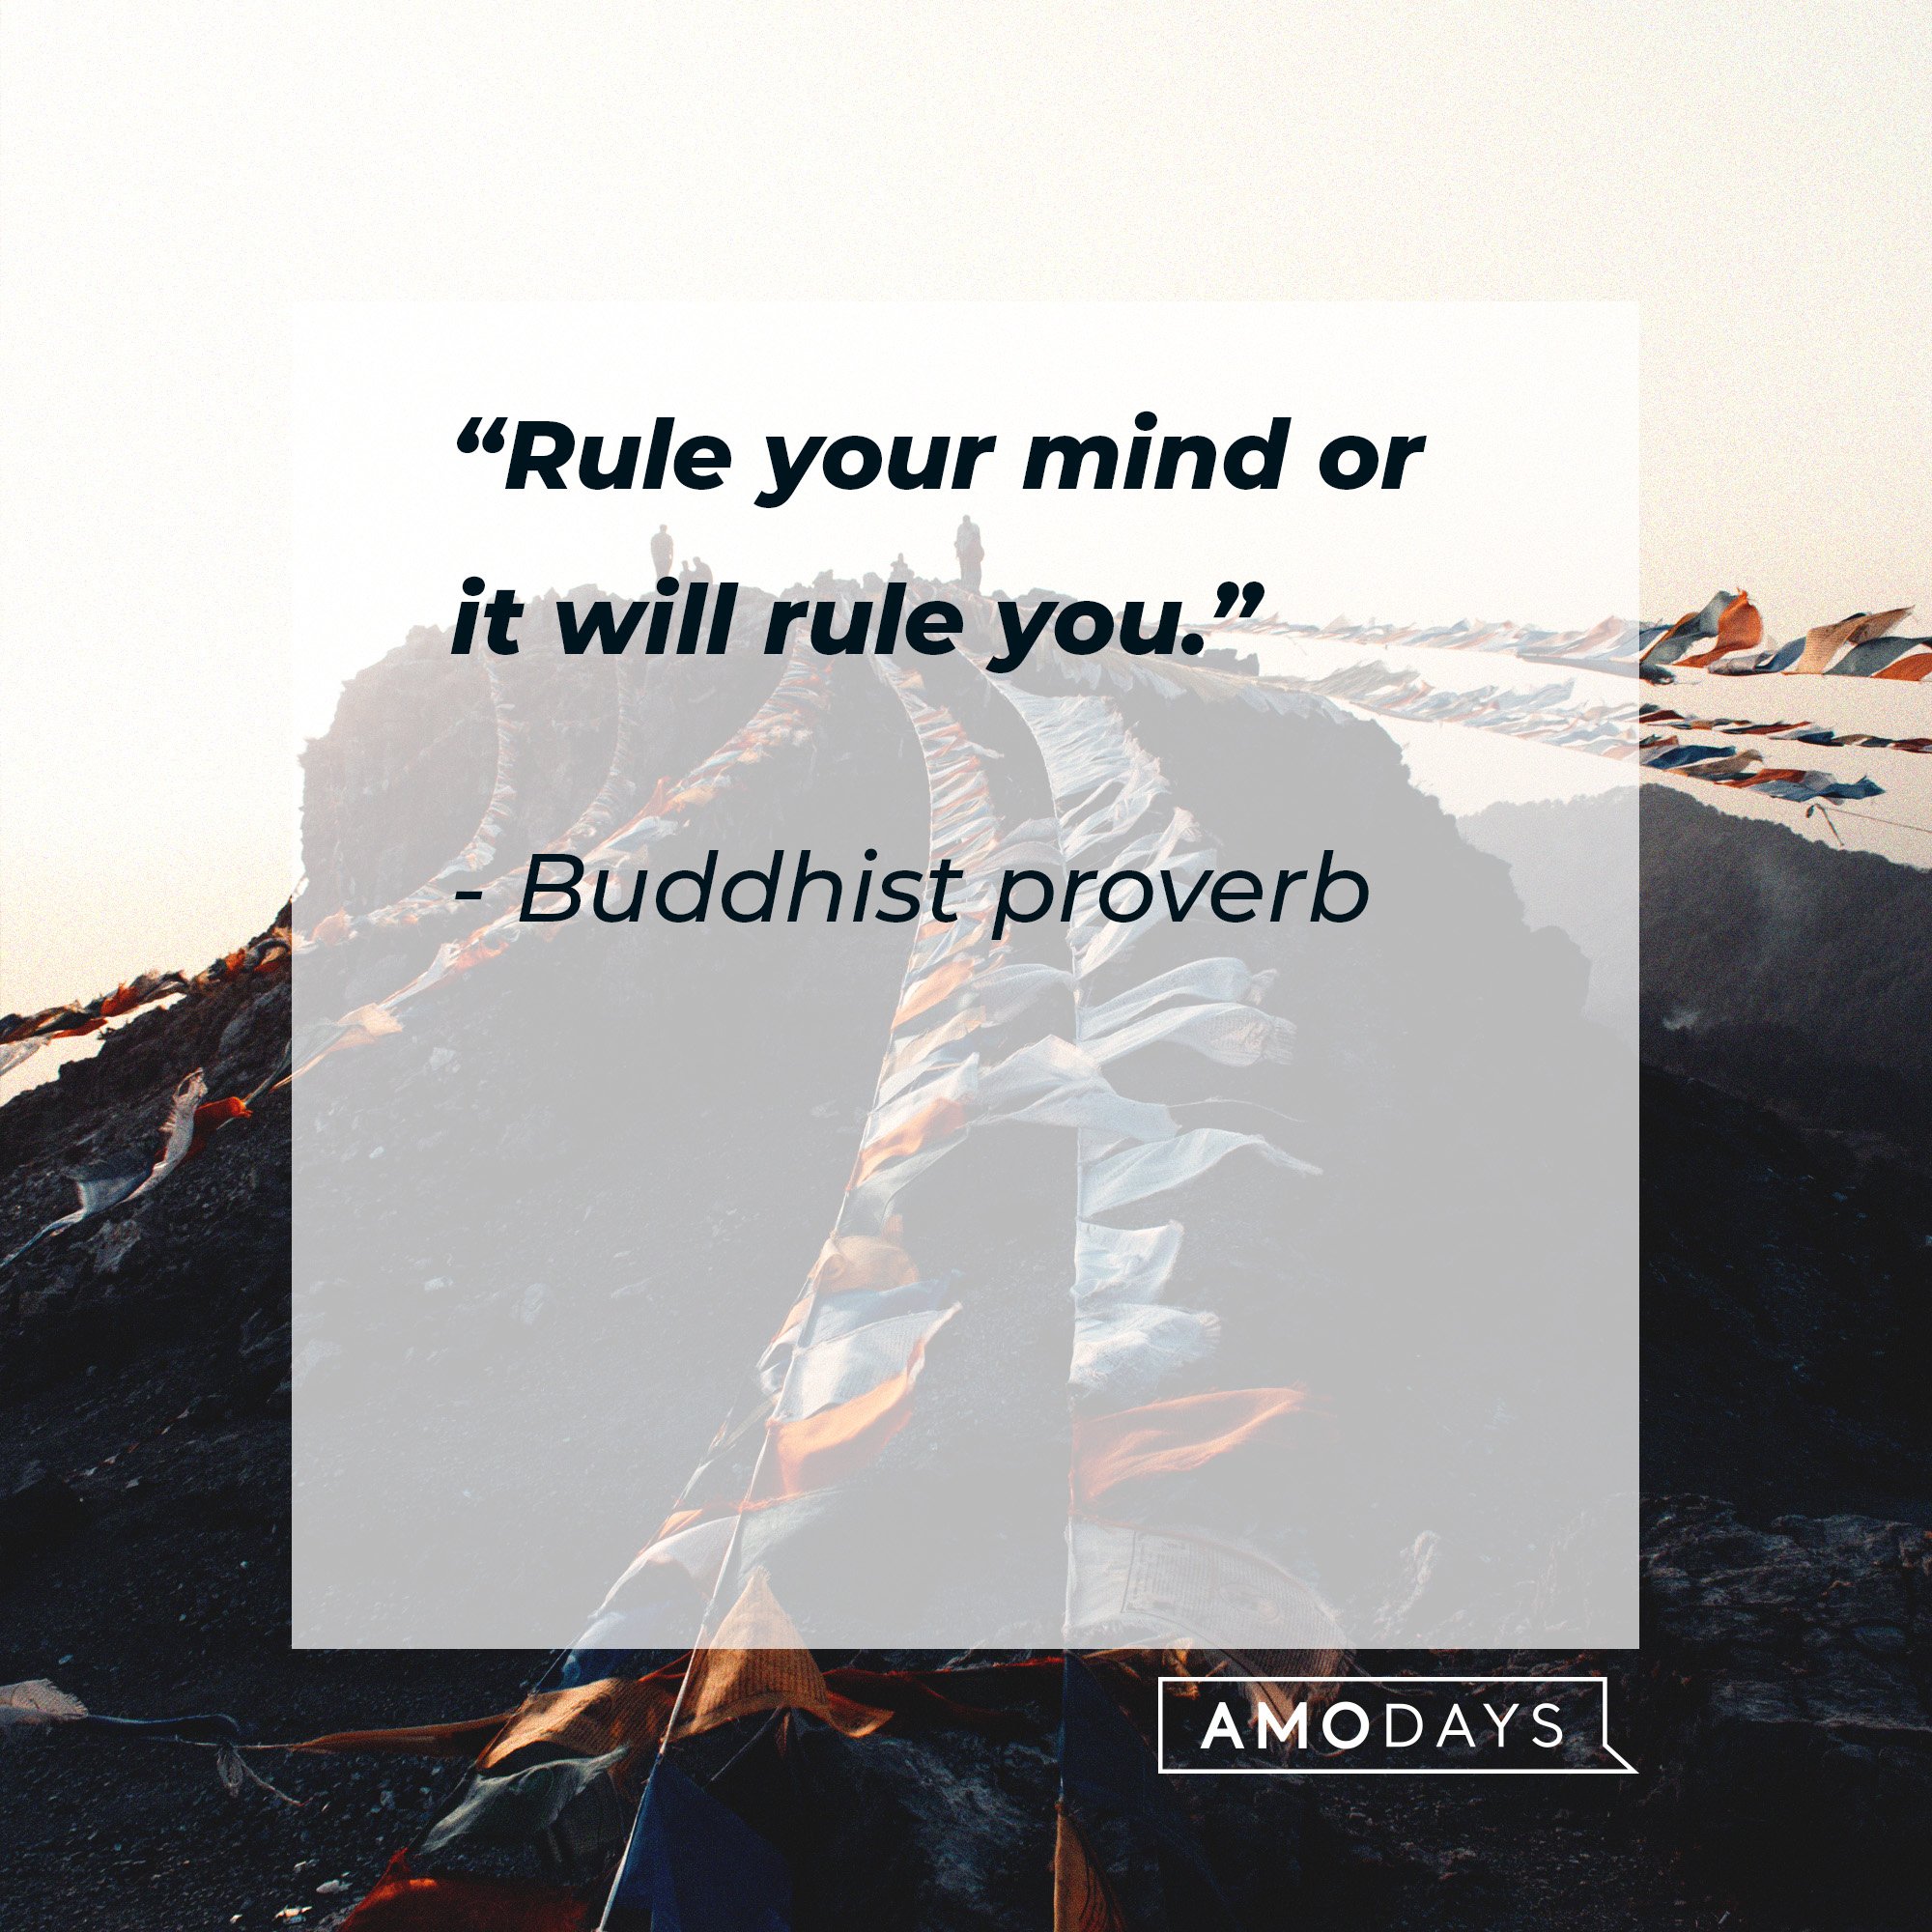 Buddhist proverb: “Rule your mind or it will rule you.” | Image: AmoDays